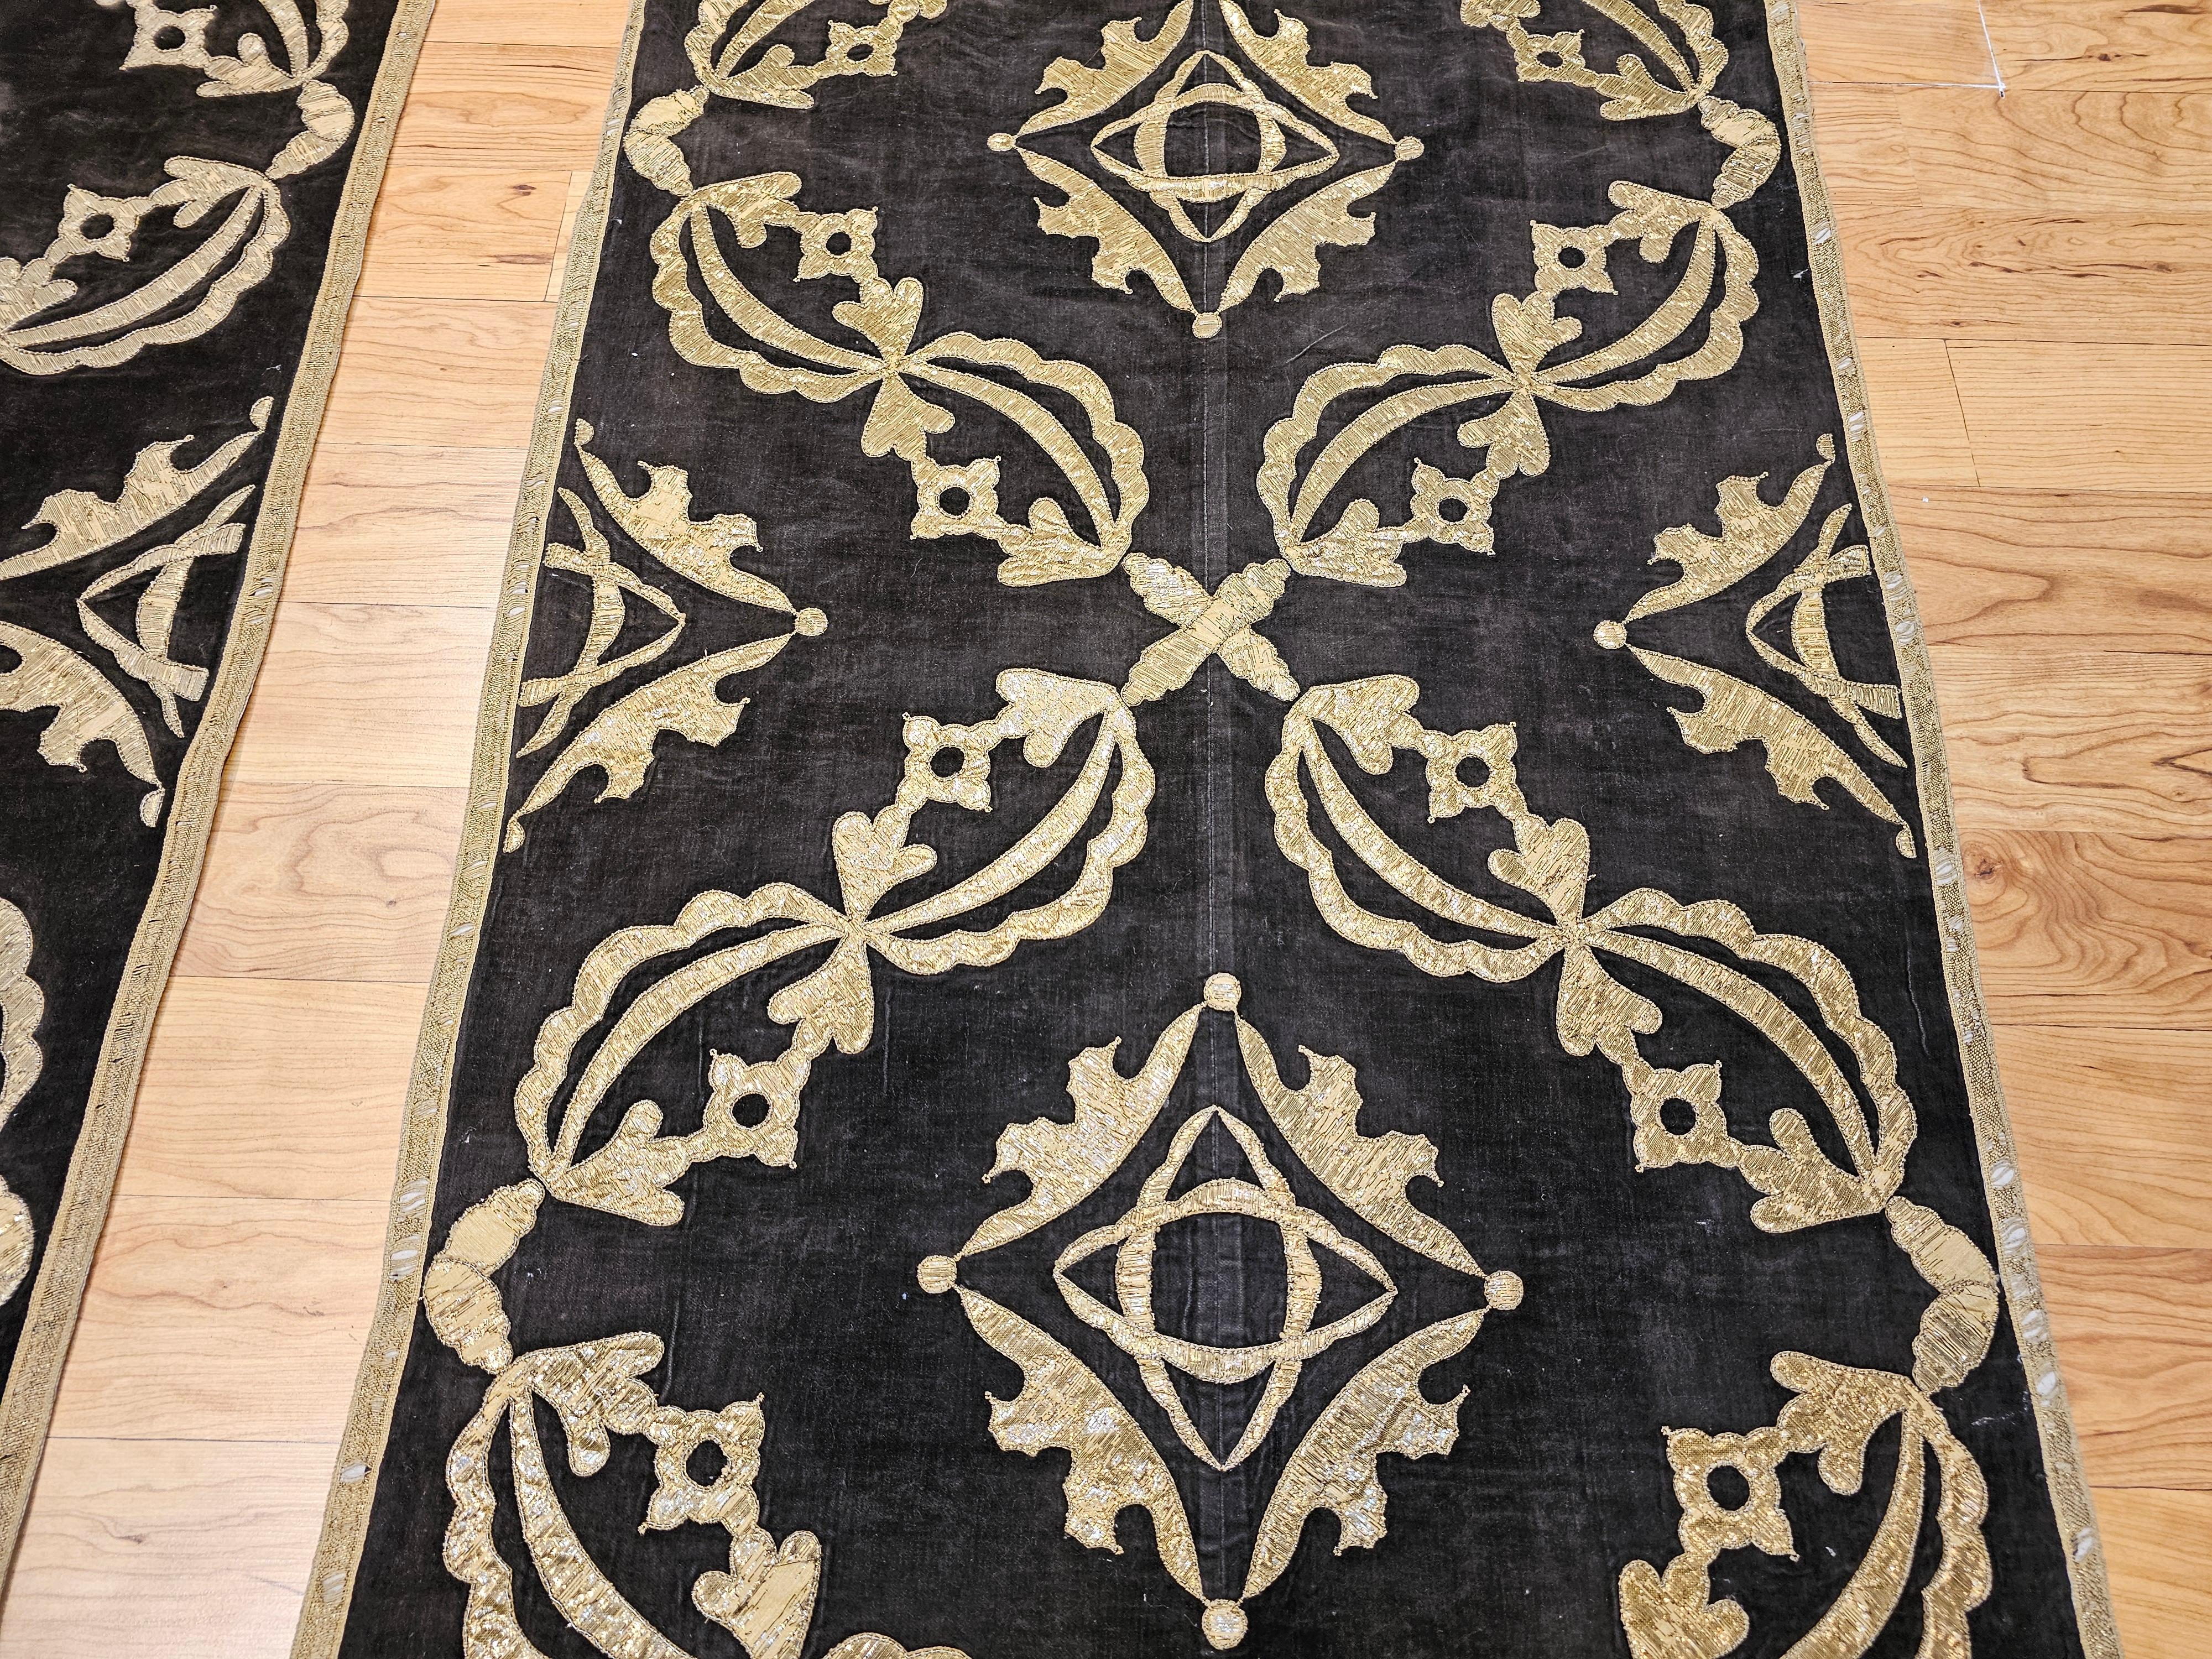 18th Century Ottoman Gilt Threads Brocade Embroidery Textile Panels (A Pair) For Sale 2